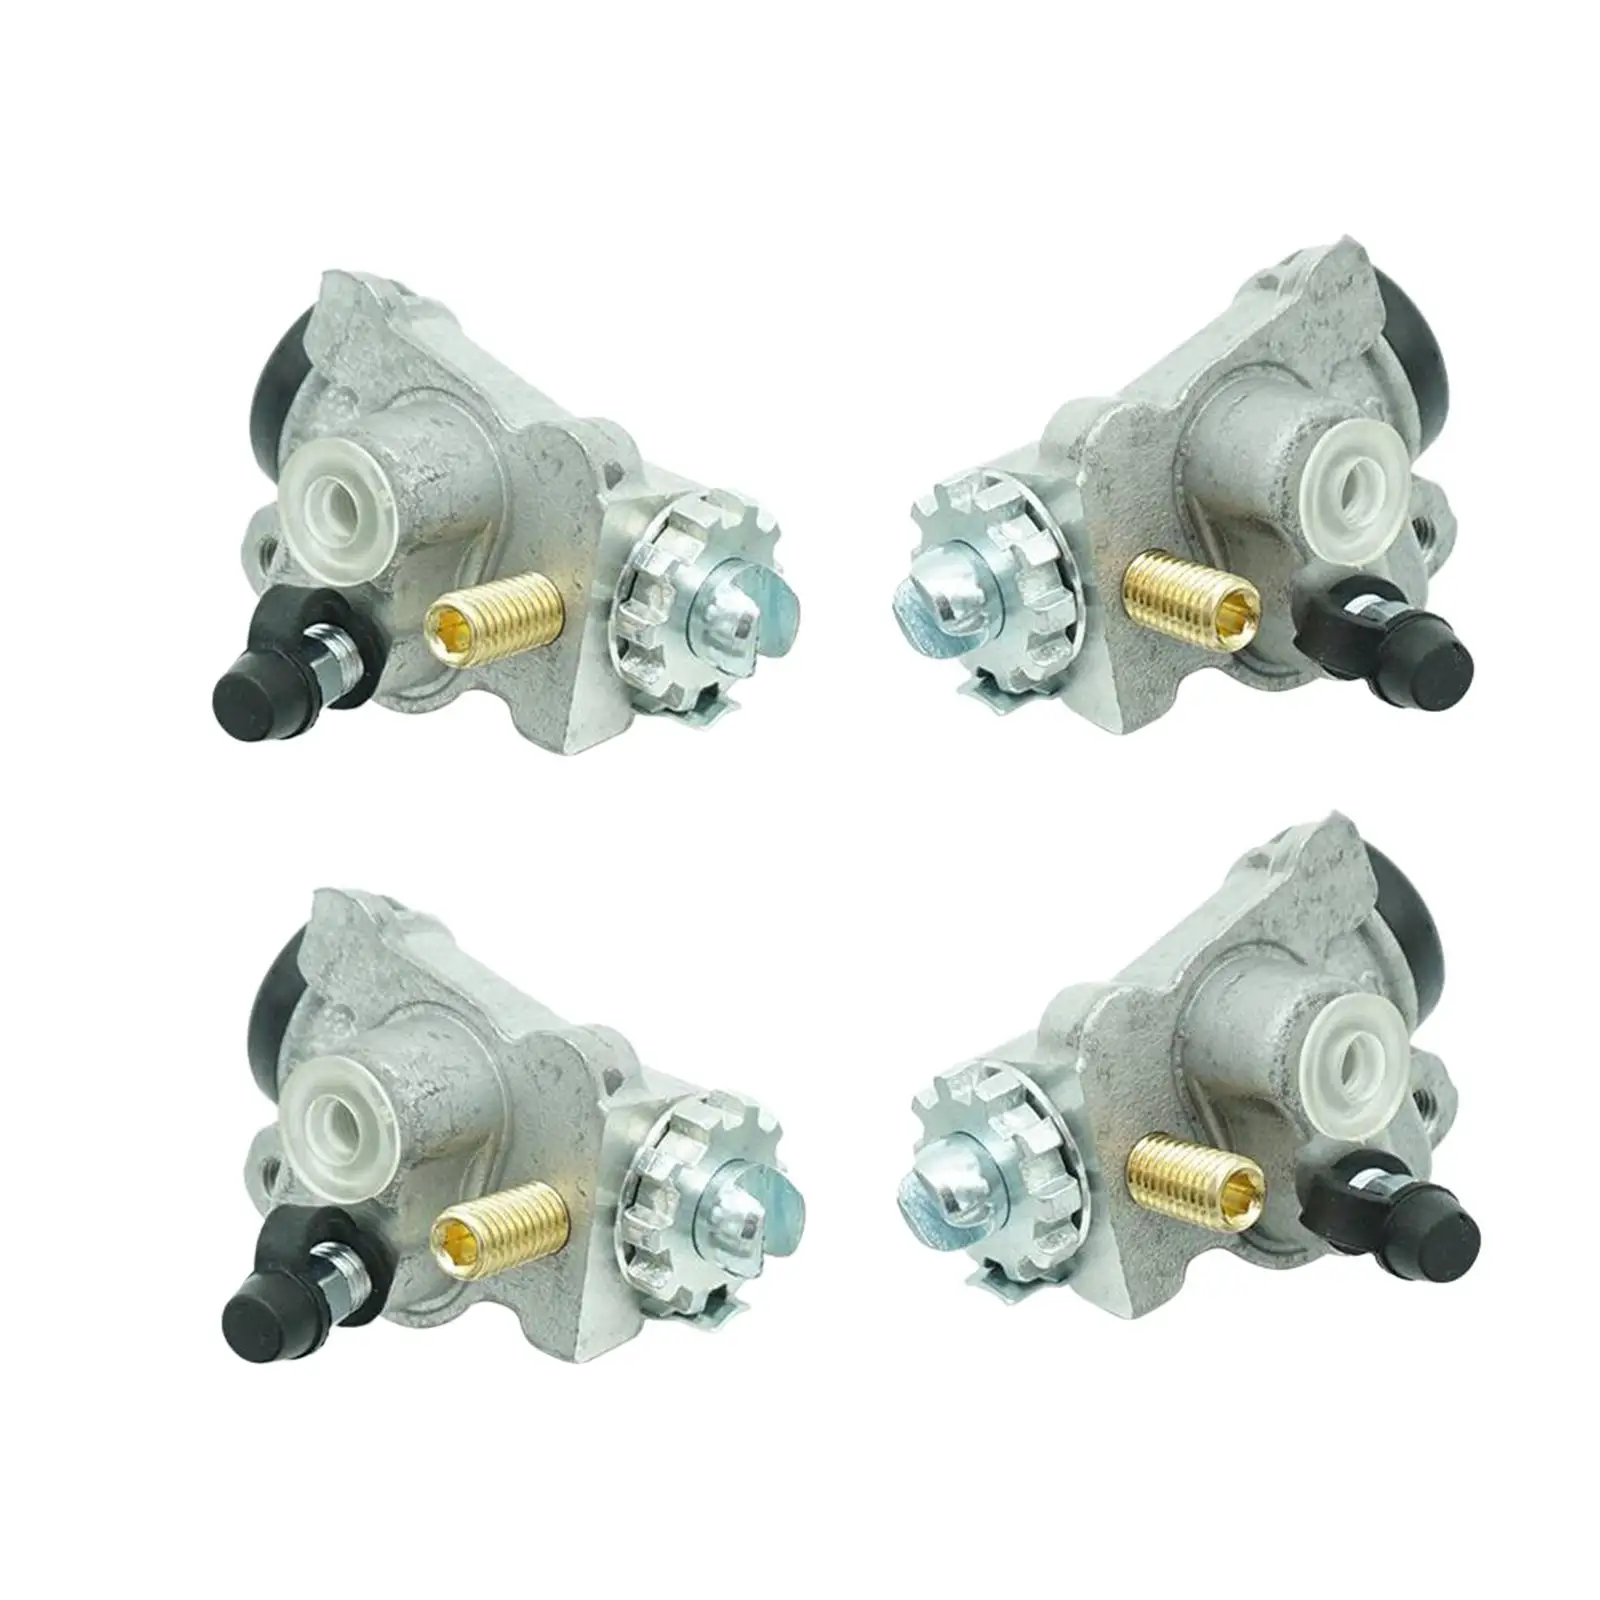 4Pcs Front Brake Wheel Cylinders for Honda Foreman 450 Replacement Easy to Install